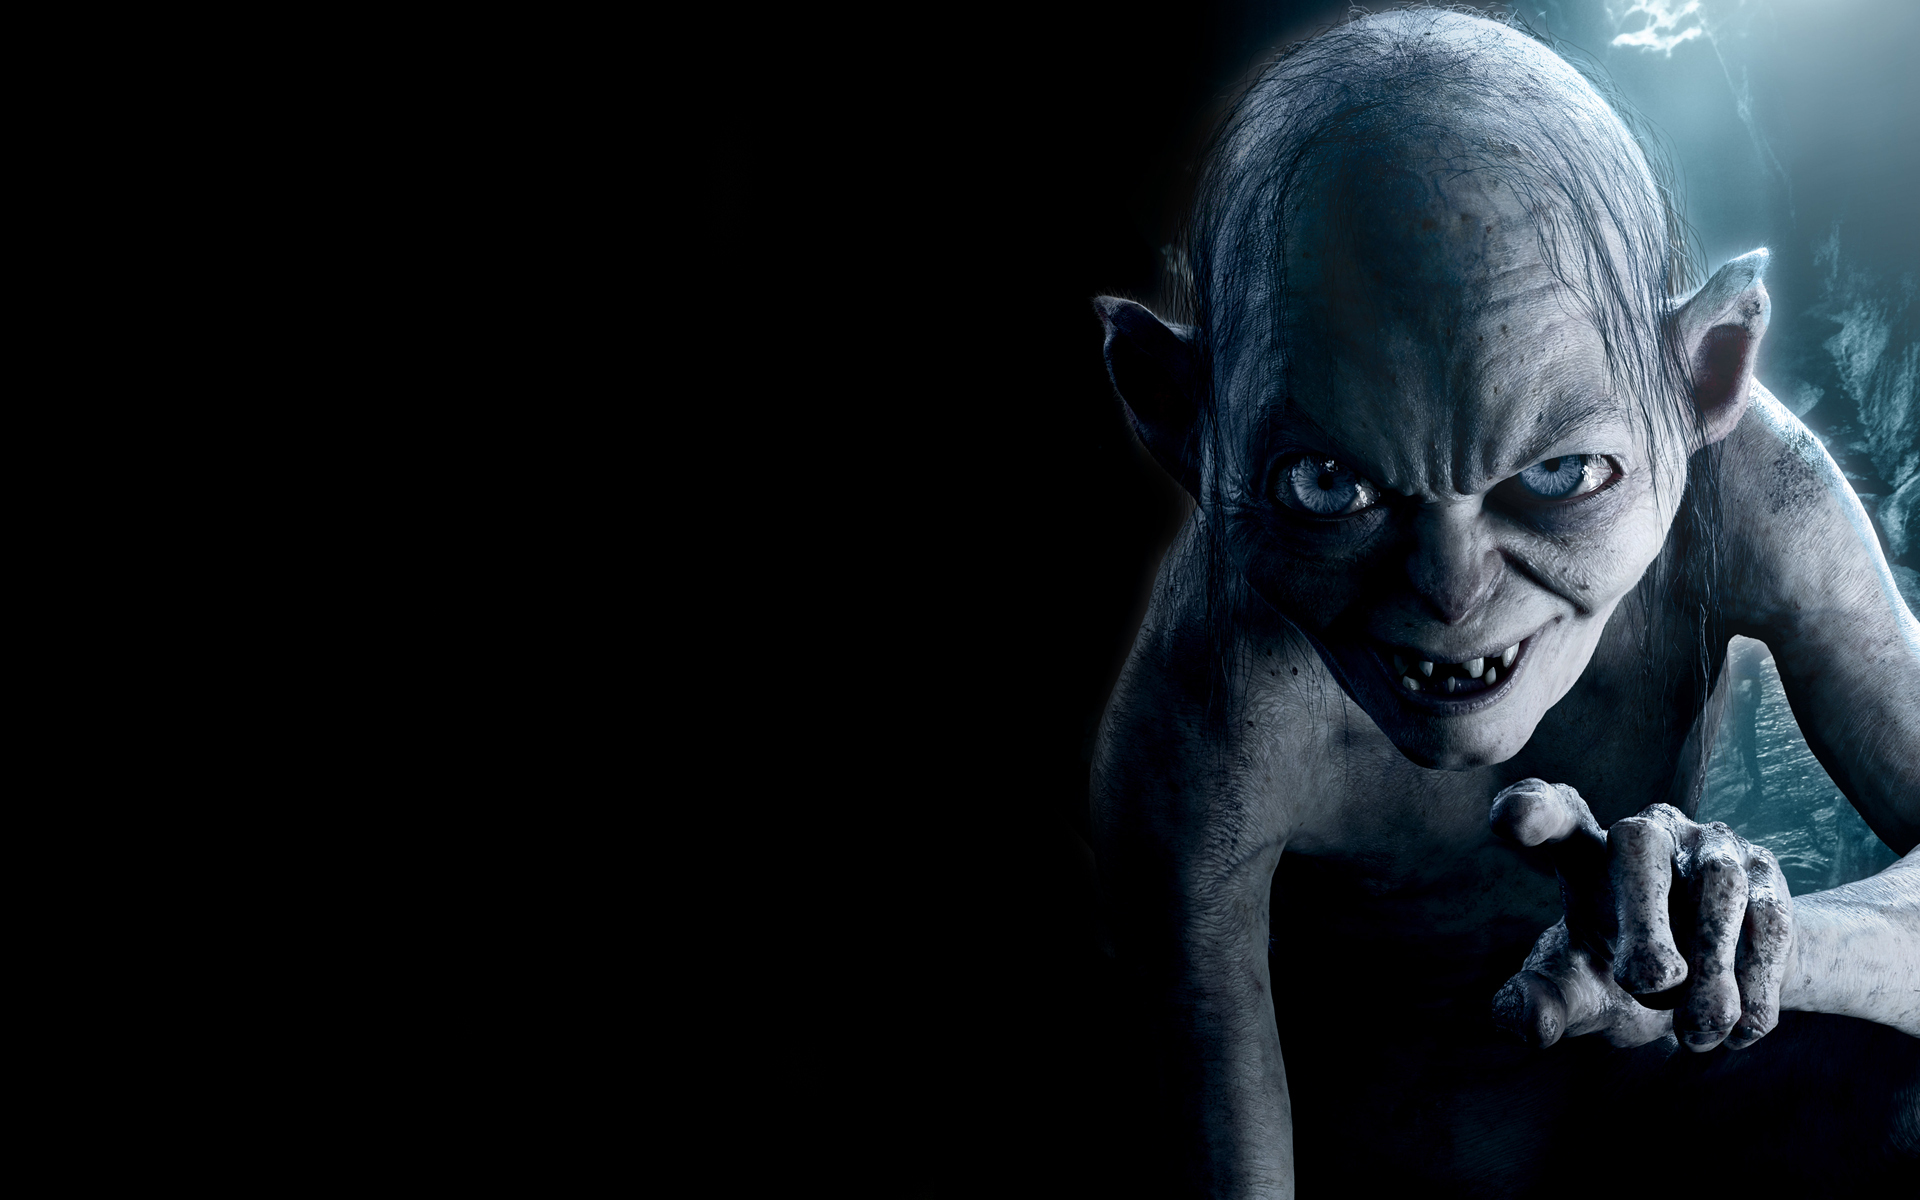 Free Download - Gollum Lord Of The Rings , HD Wallpaper & Backgrounds